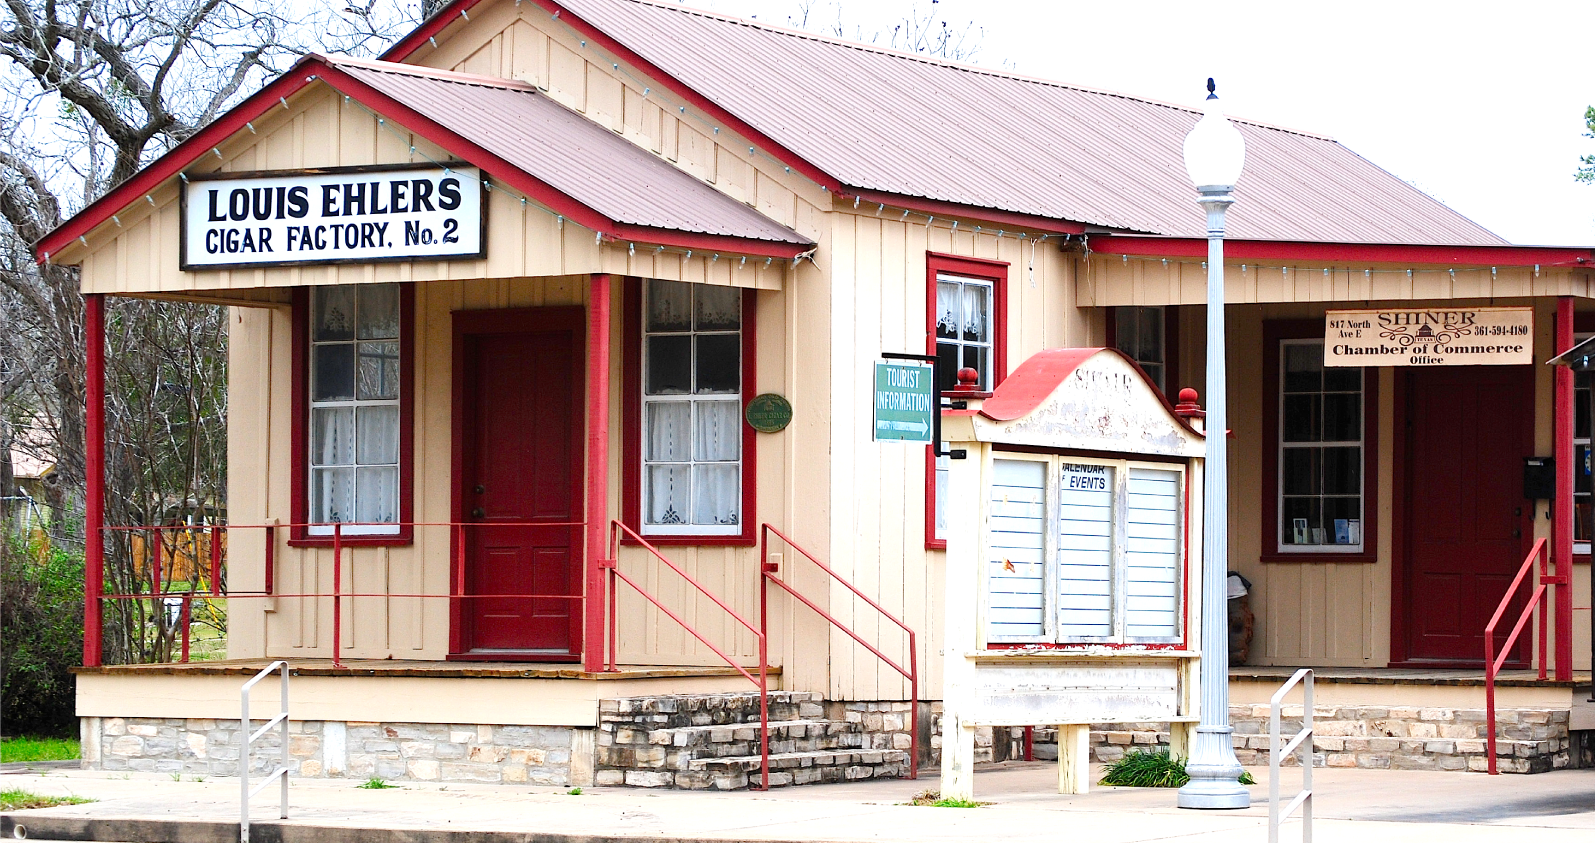 Photo of the historic Louis Ehlers Cigar Factory No. 2, now serving as the Shiner Chamber of Commerce with a tourist information center. The building is painted beige with red trims, featuring a front porch and a stone foundation.